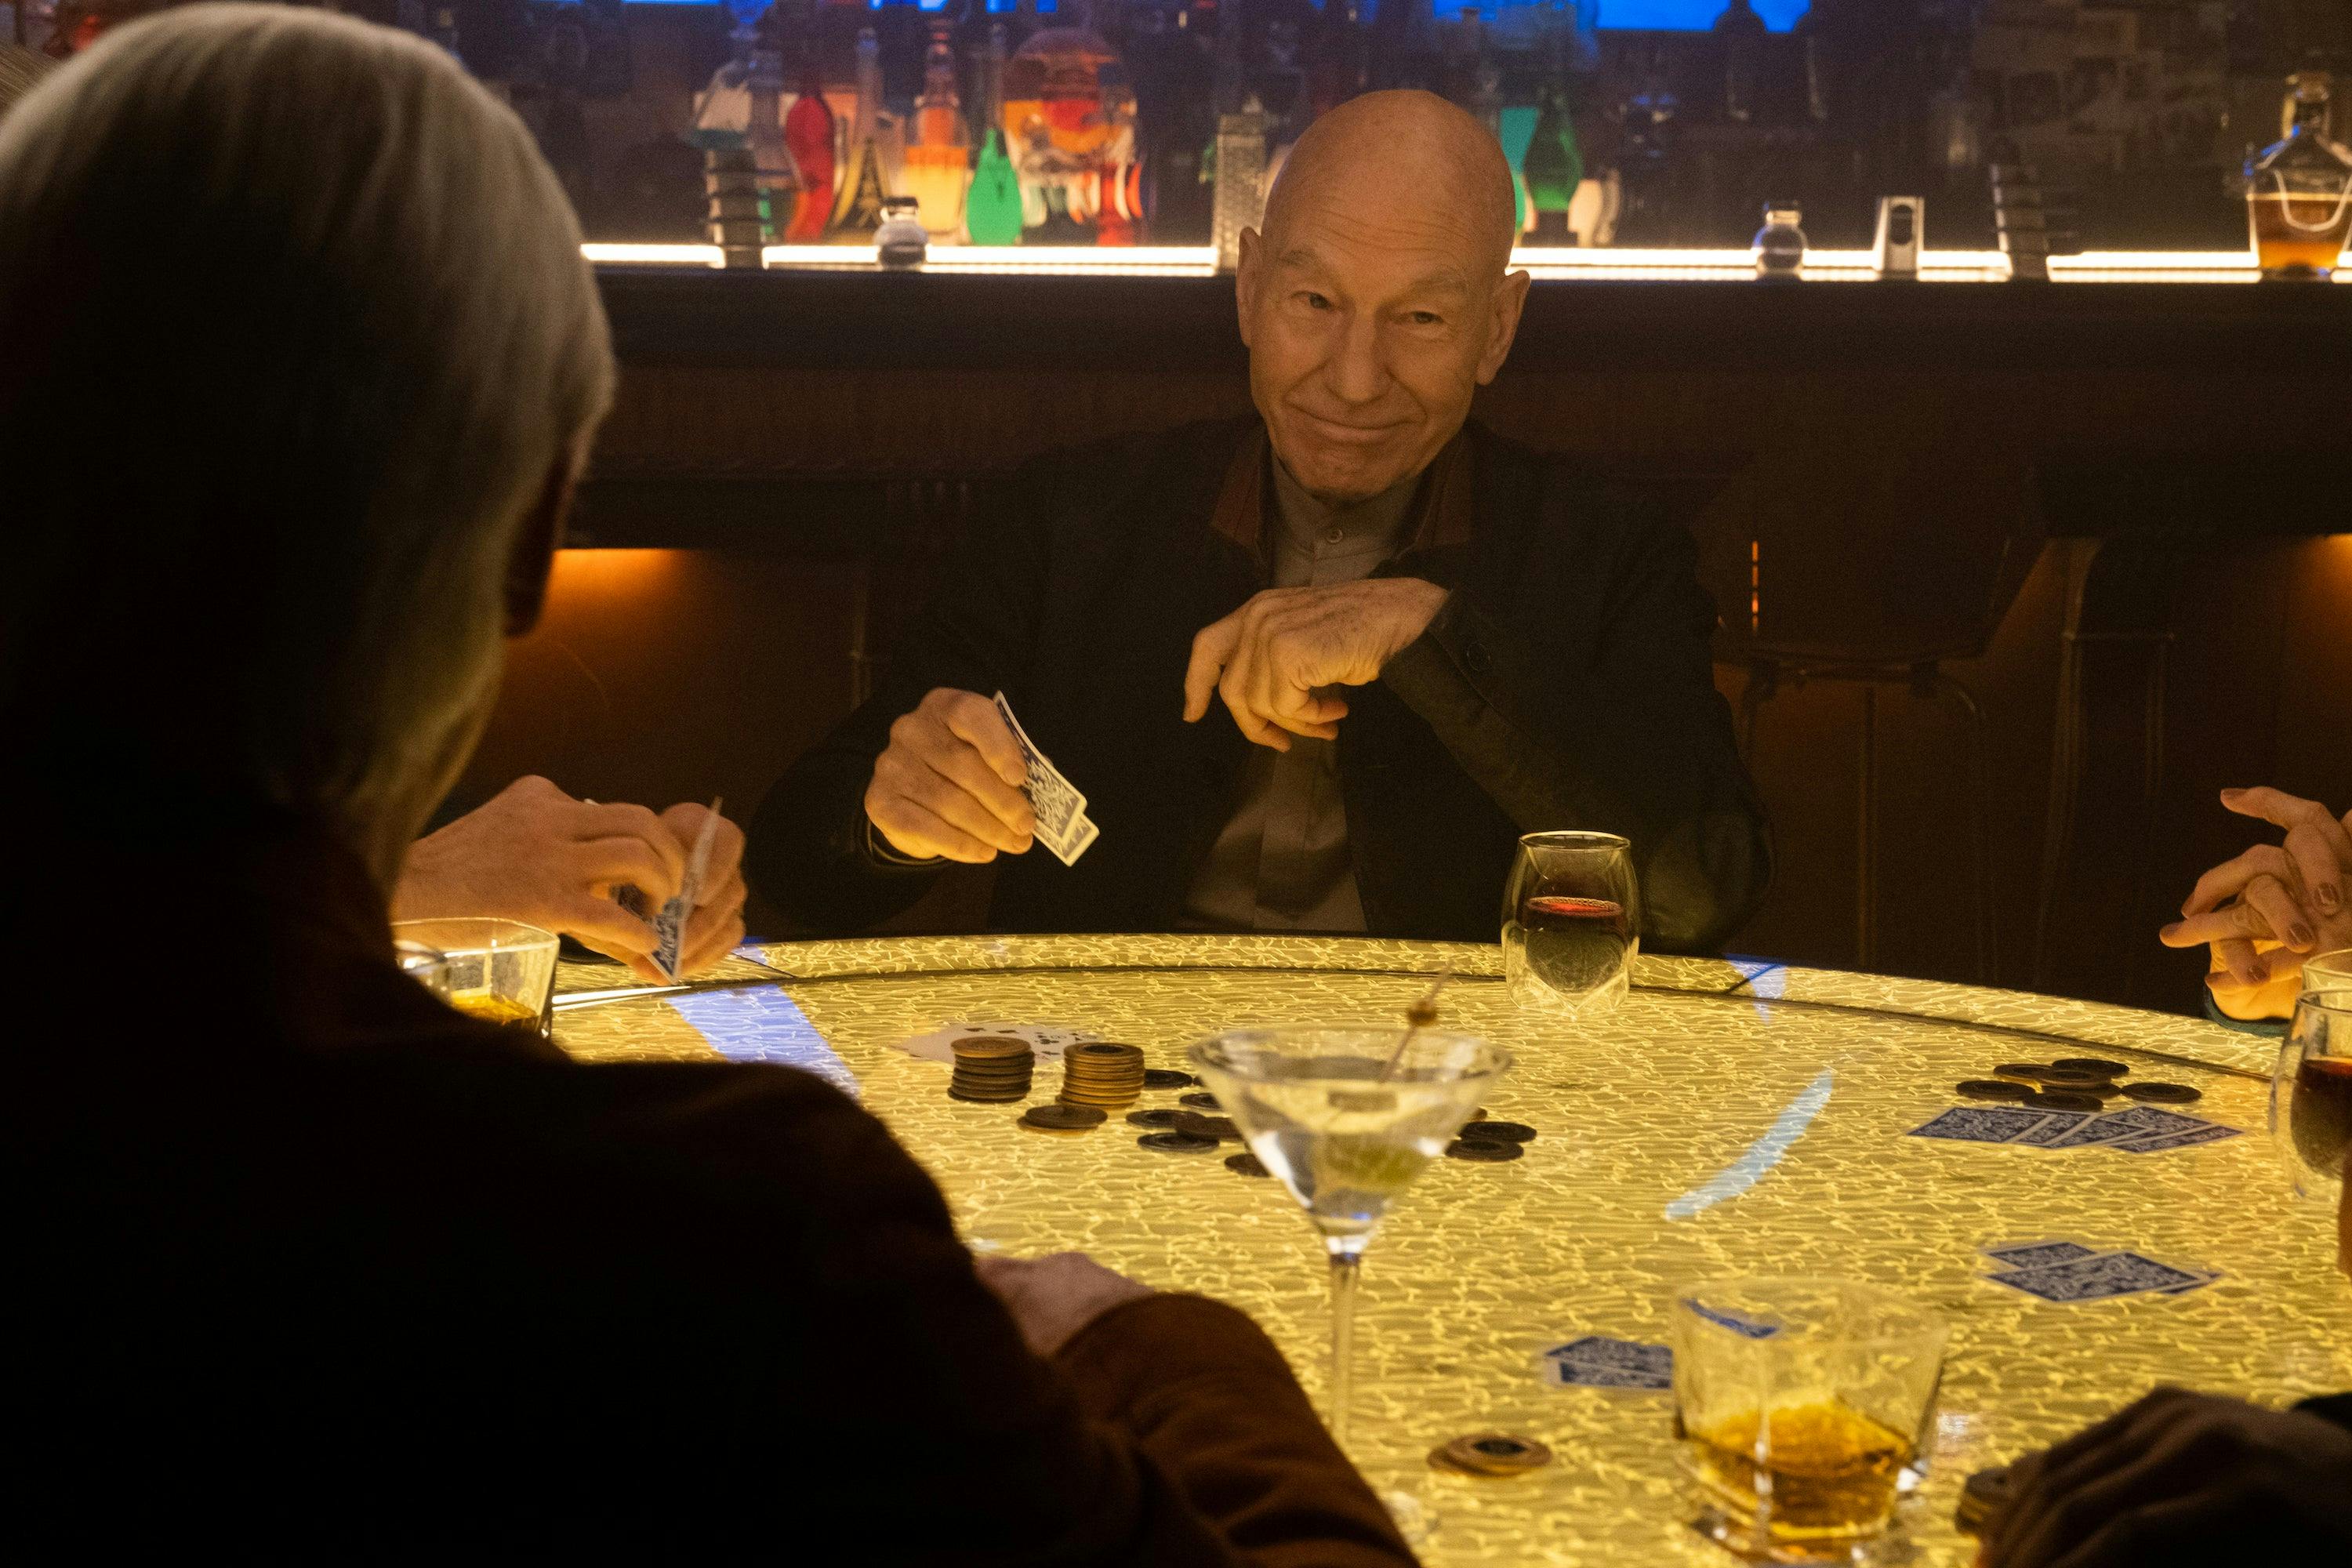 Jean-Luc Picard smiles at his crew while holding his poker cards and looking ahead in 'The Last Generation'